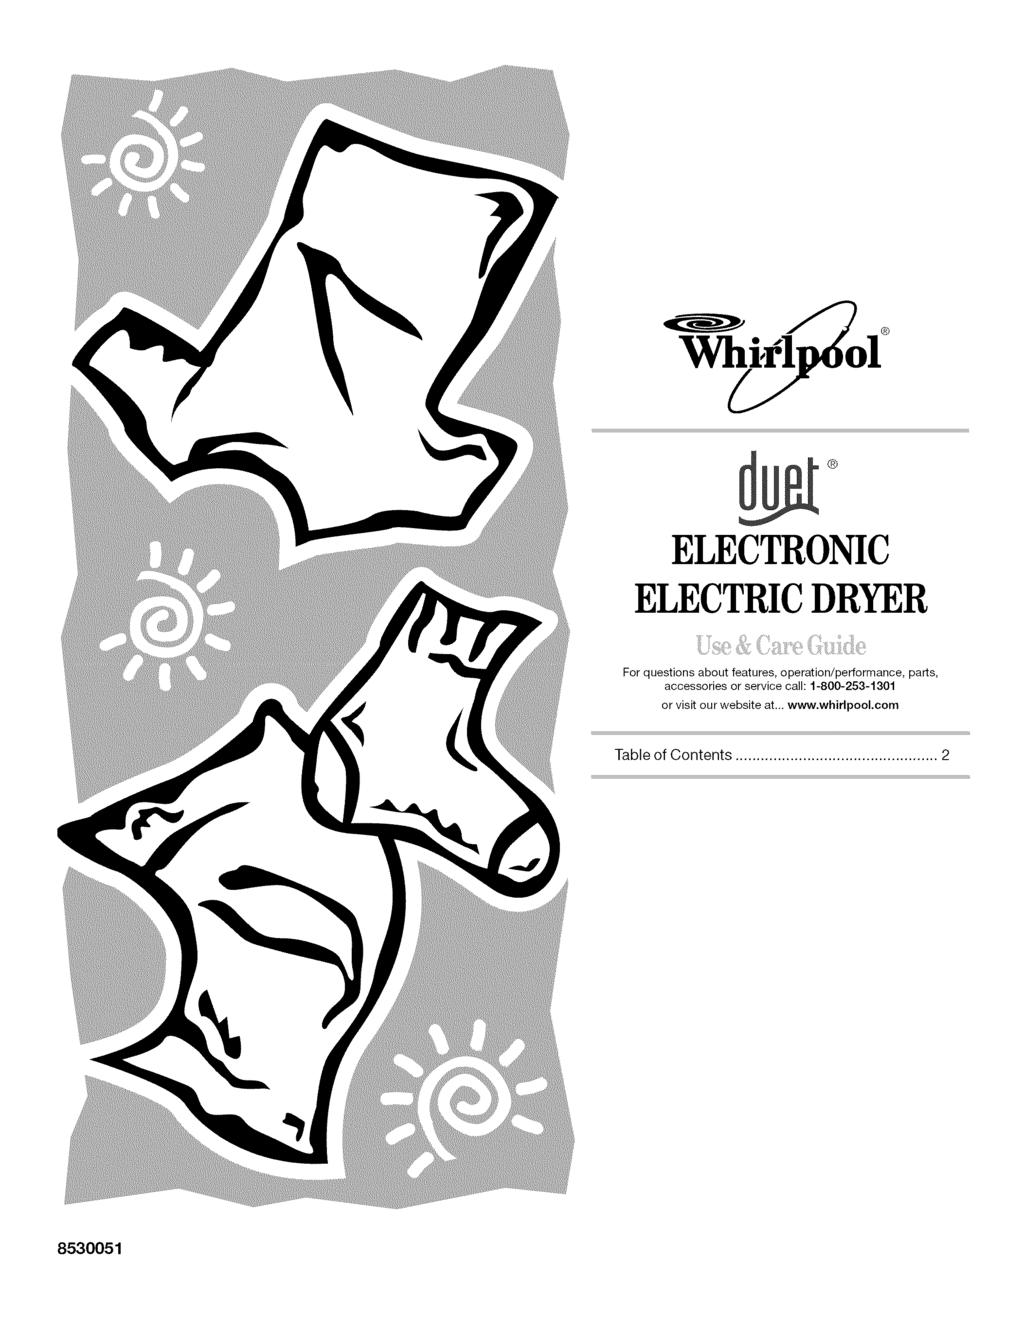 ELECTRONIC ELECTRICDRYER For questions about features, operation/performance, parts, accessories or